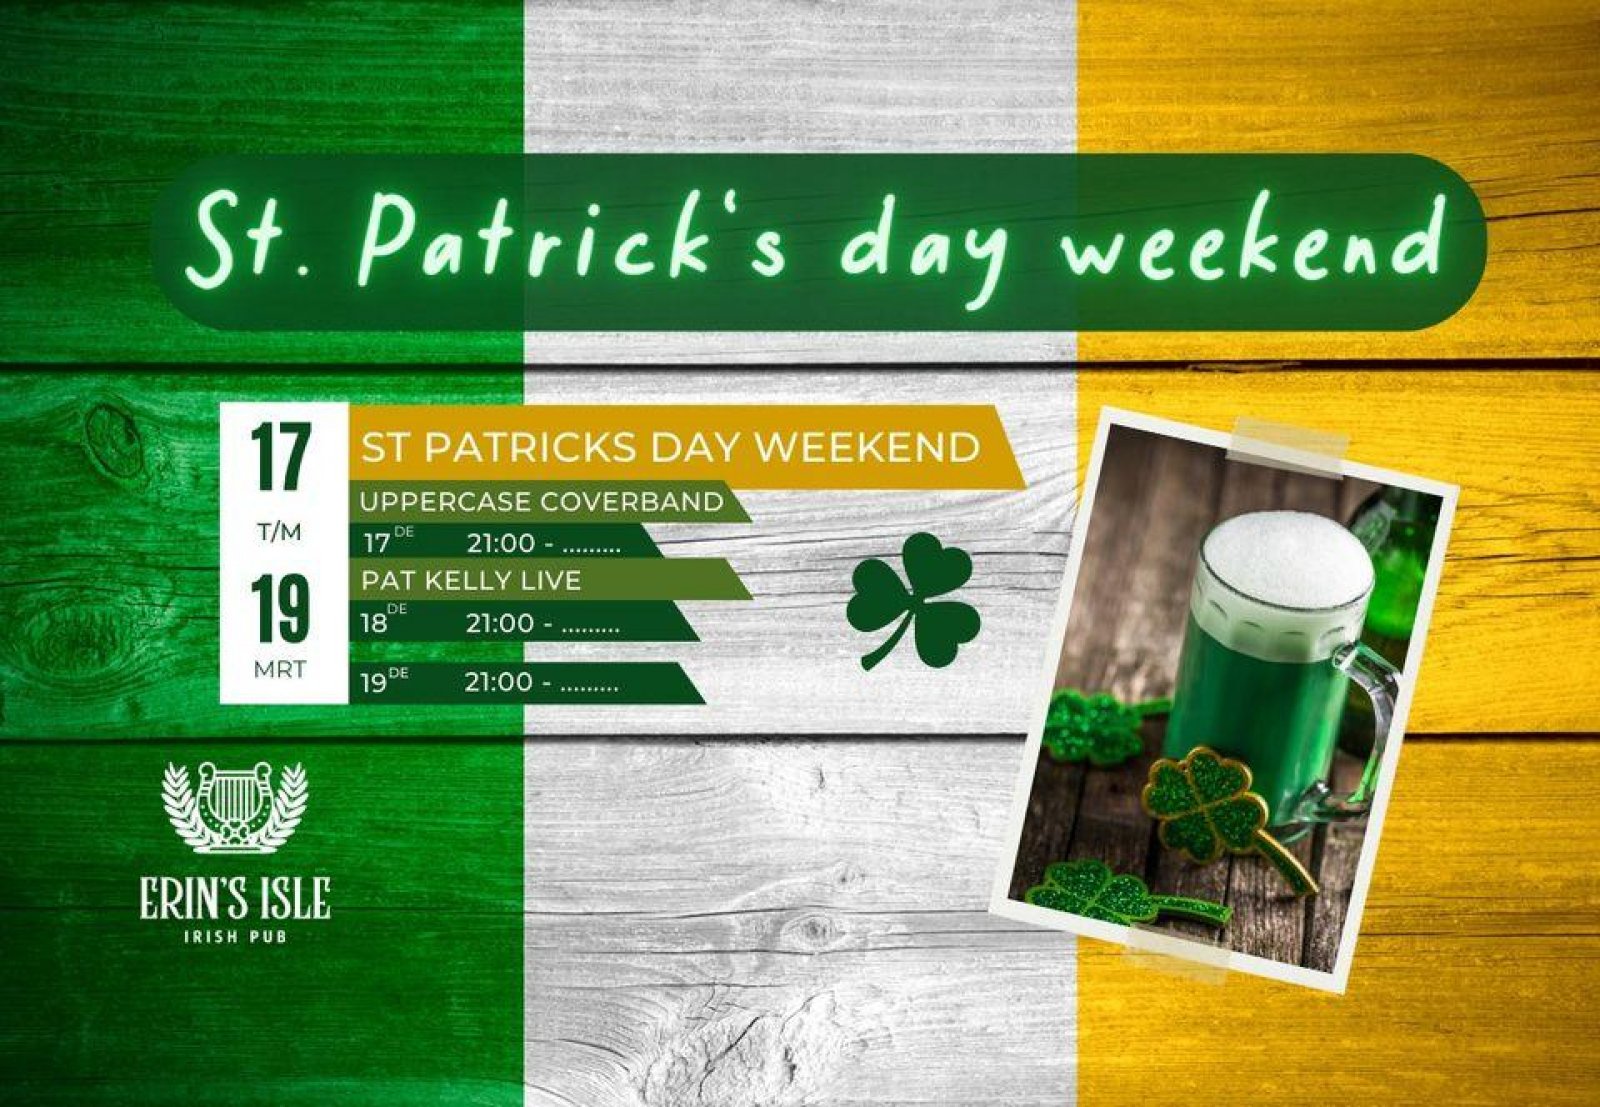 St. Patrick's Day weekend